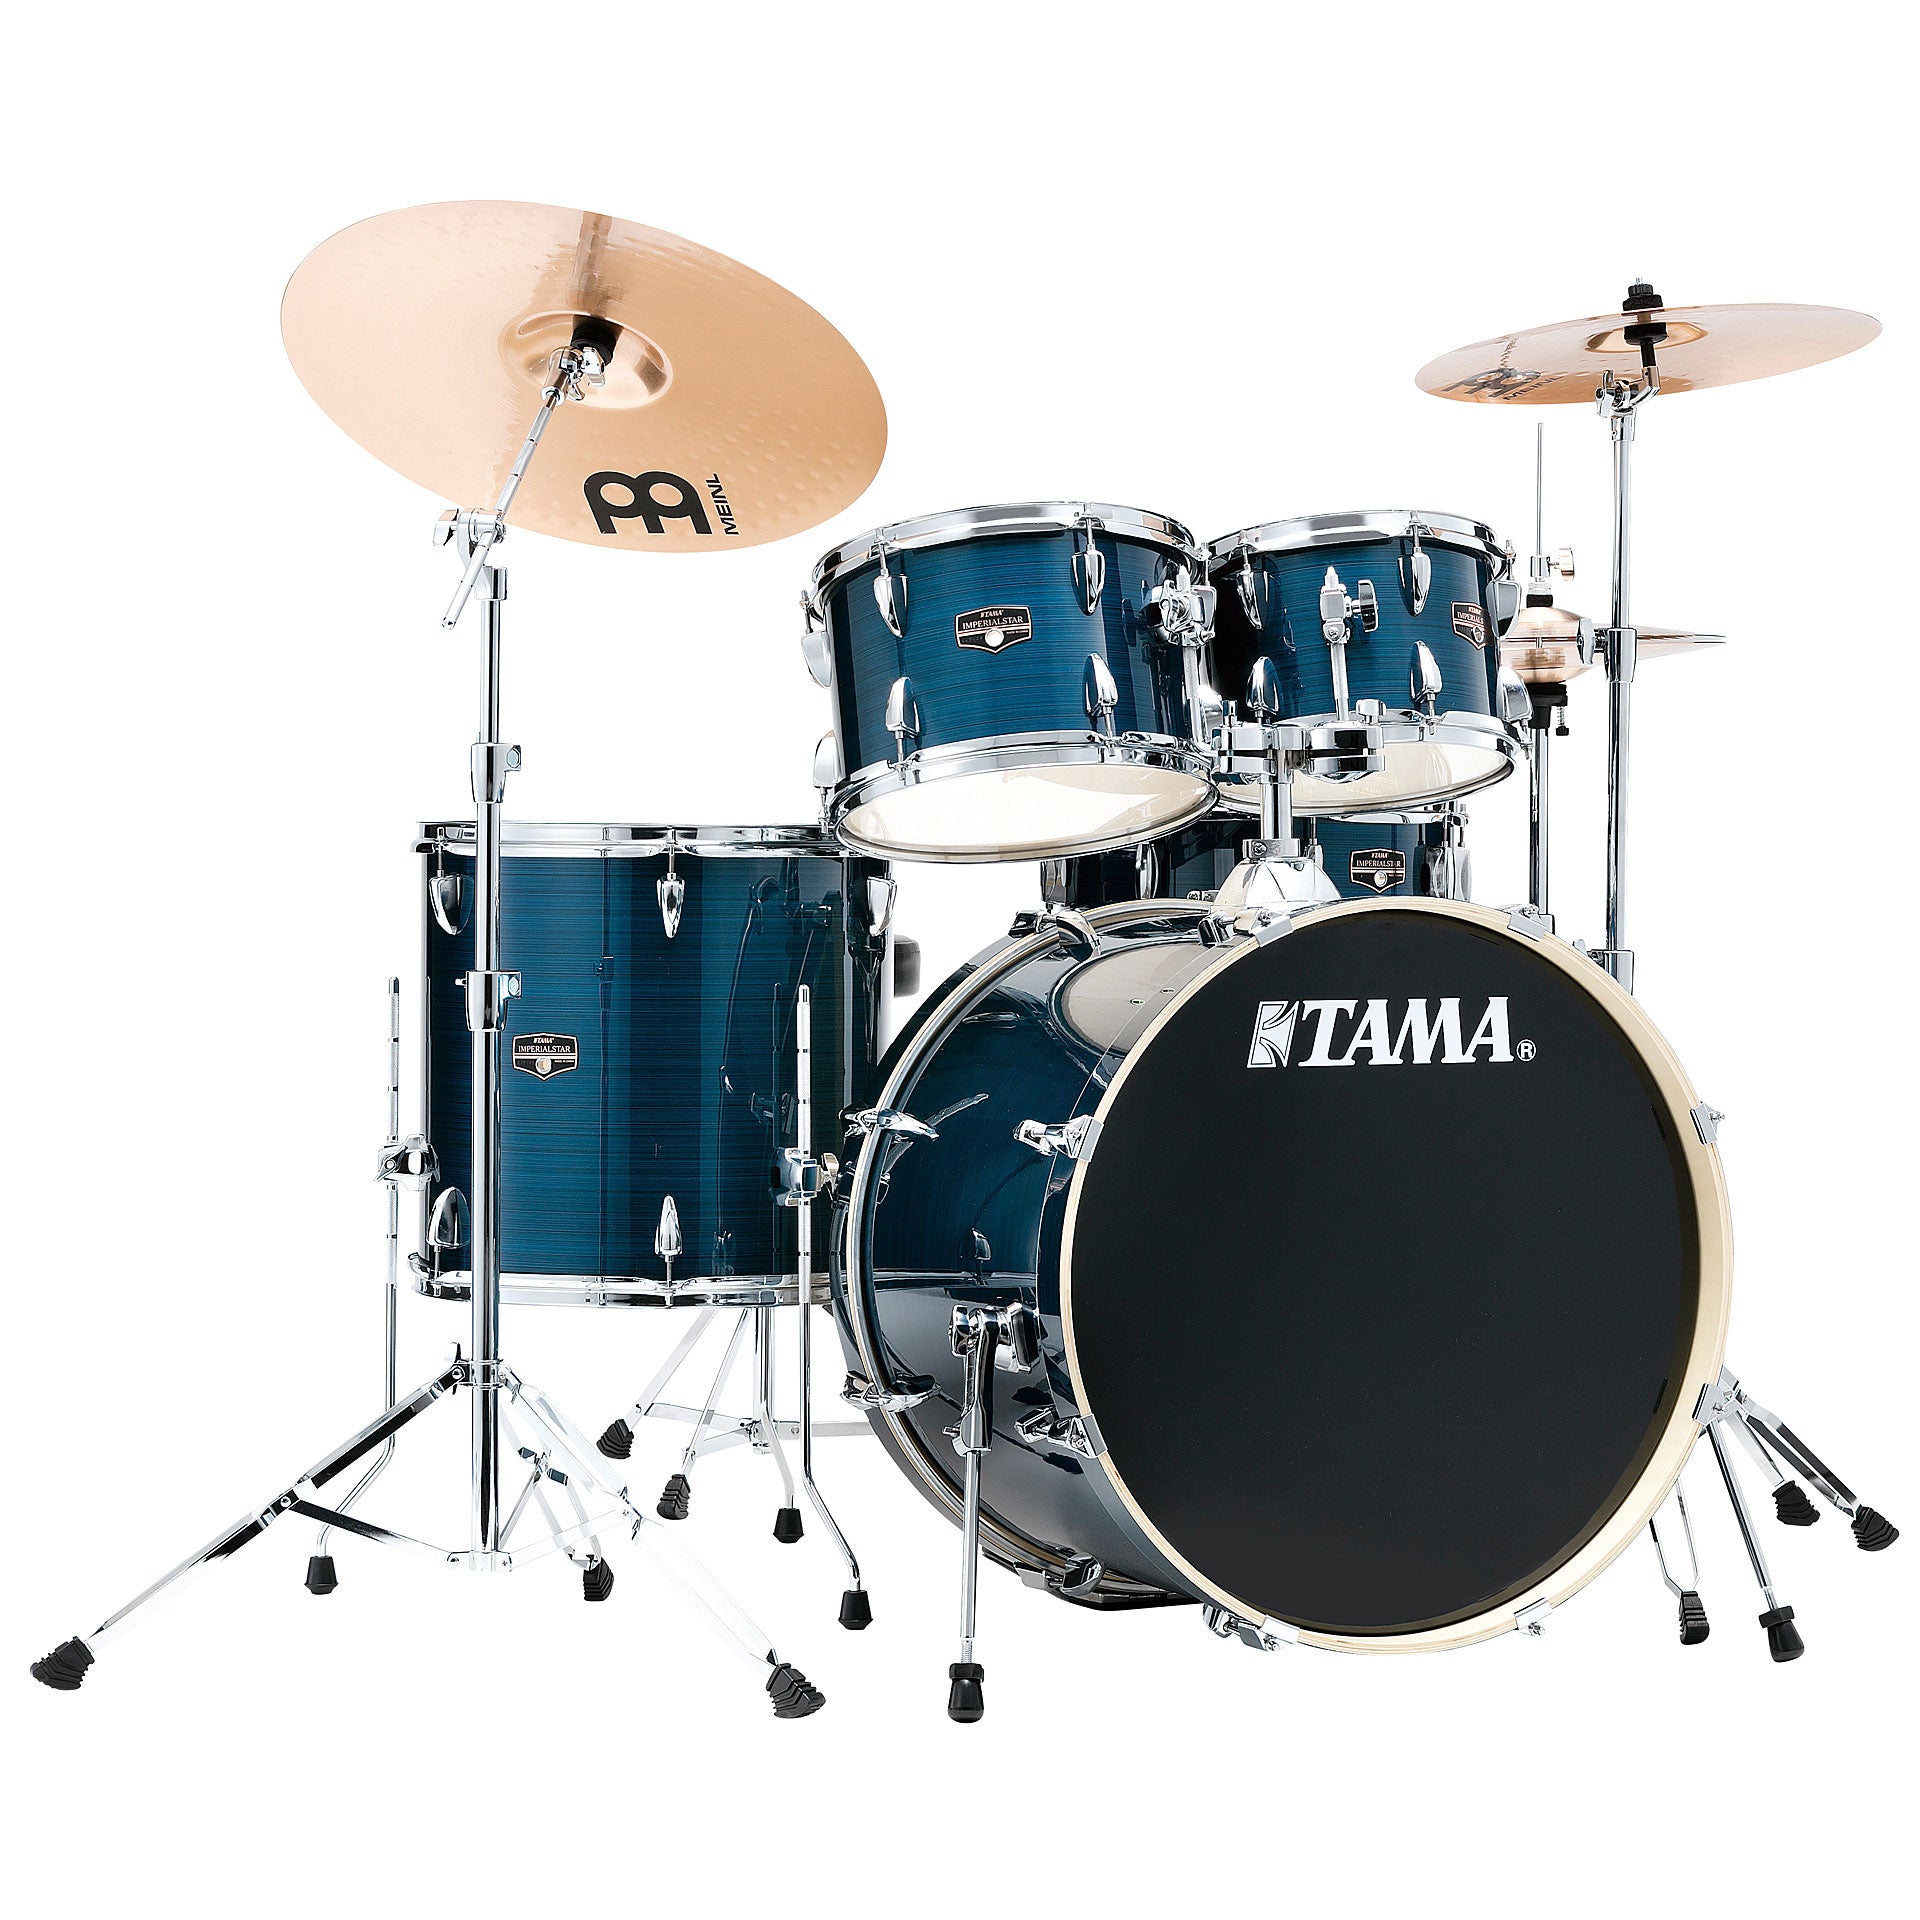 How much do professional drums cost?